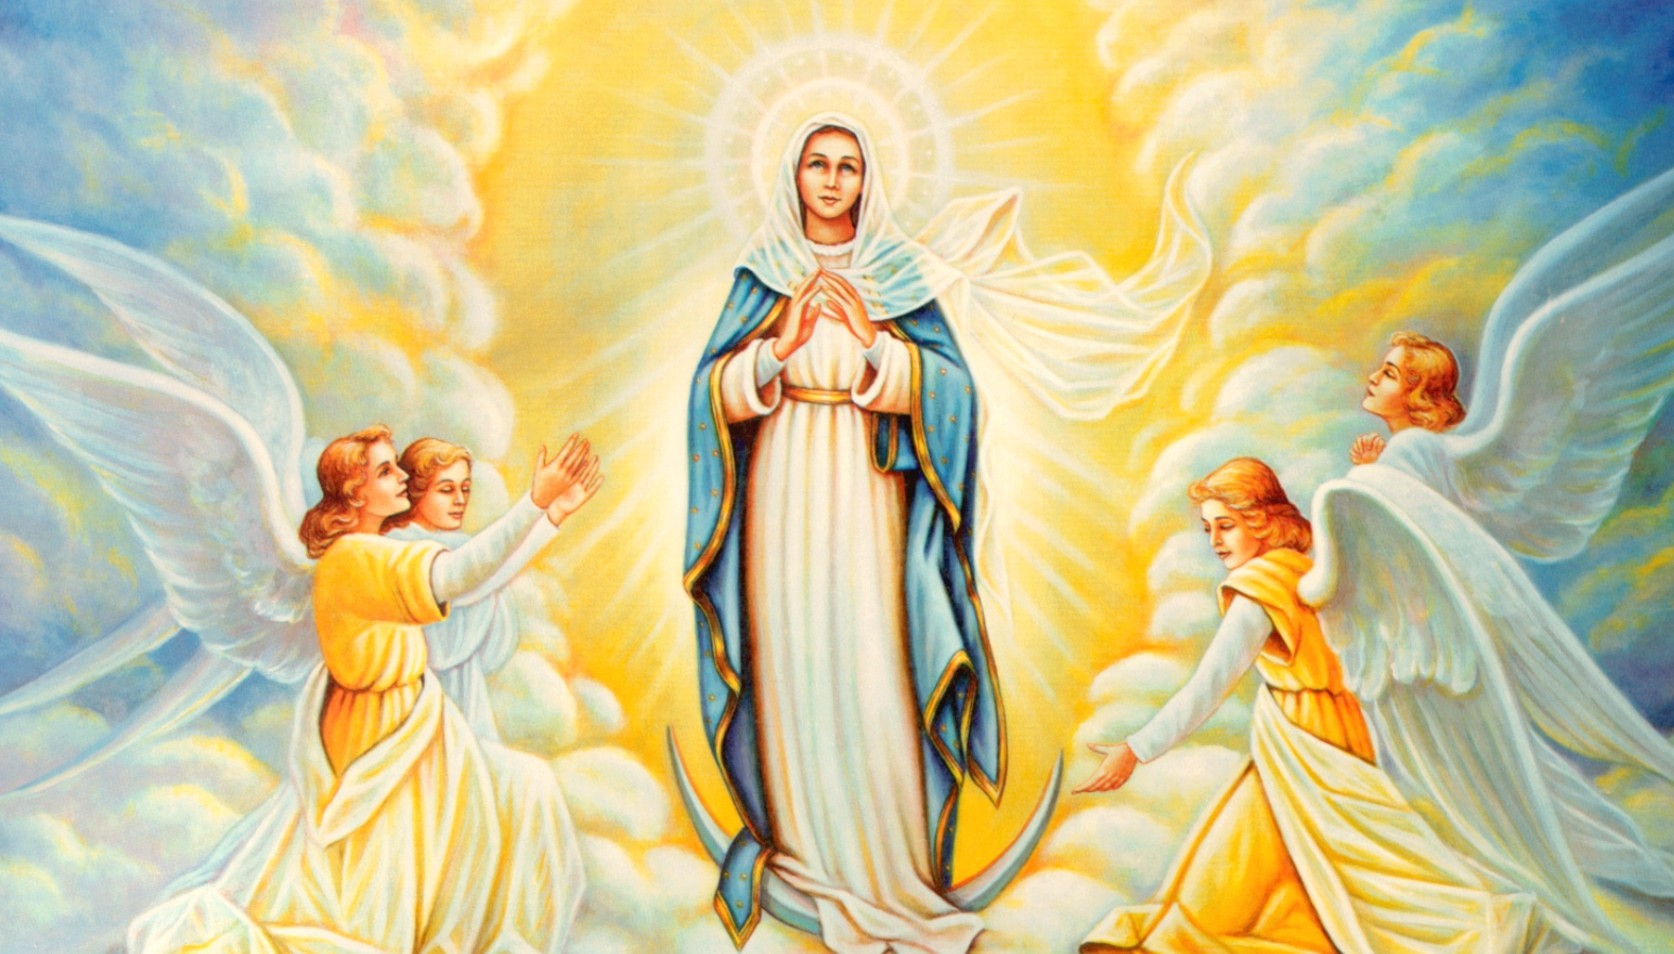 Assumption of Our Lady, according to Fr. Theodore Ratisbonne.